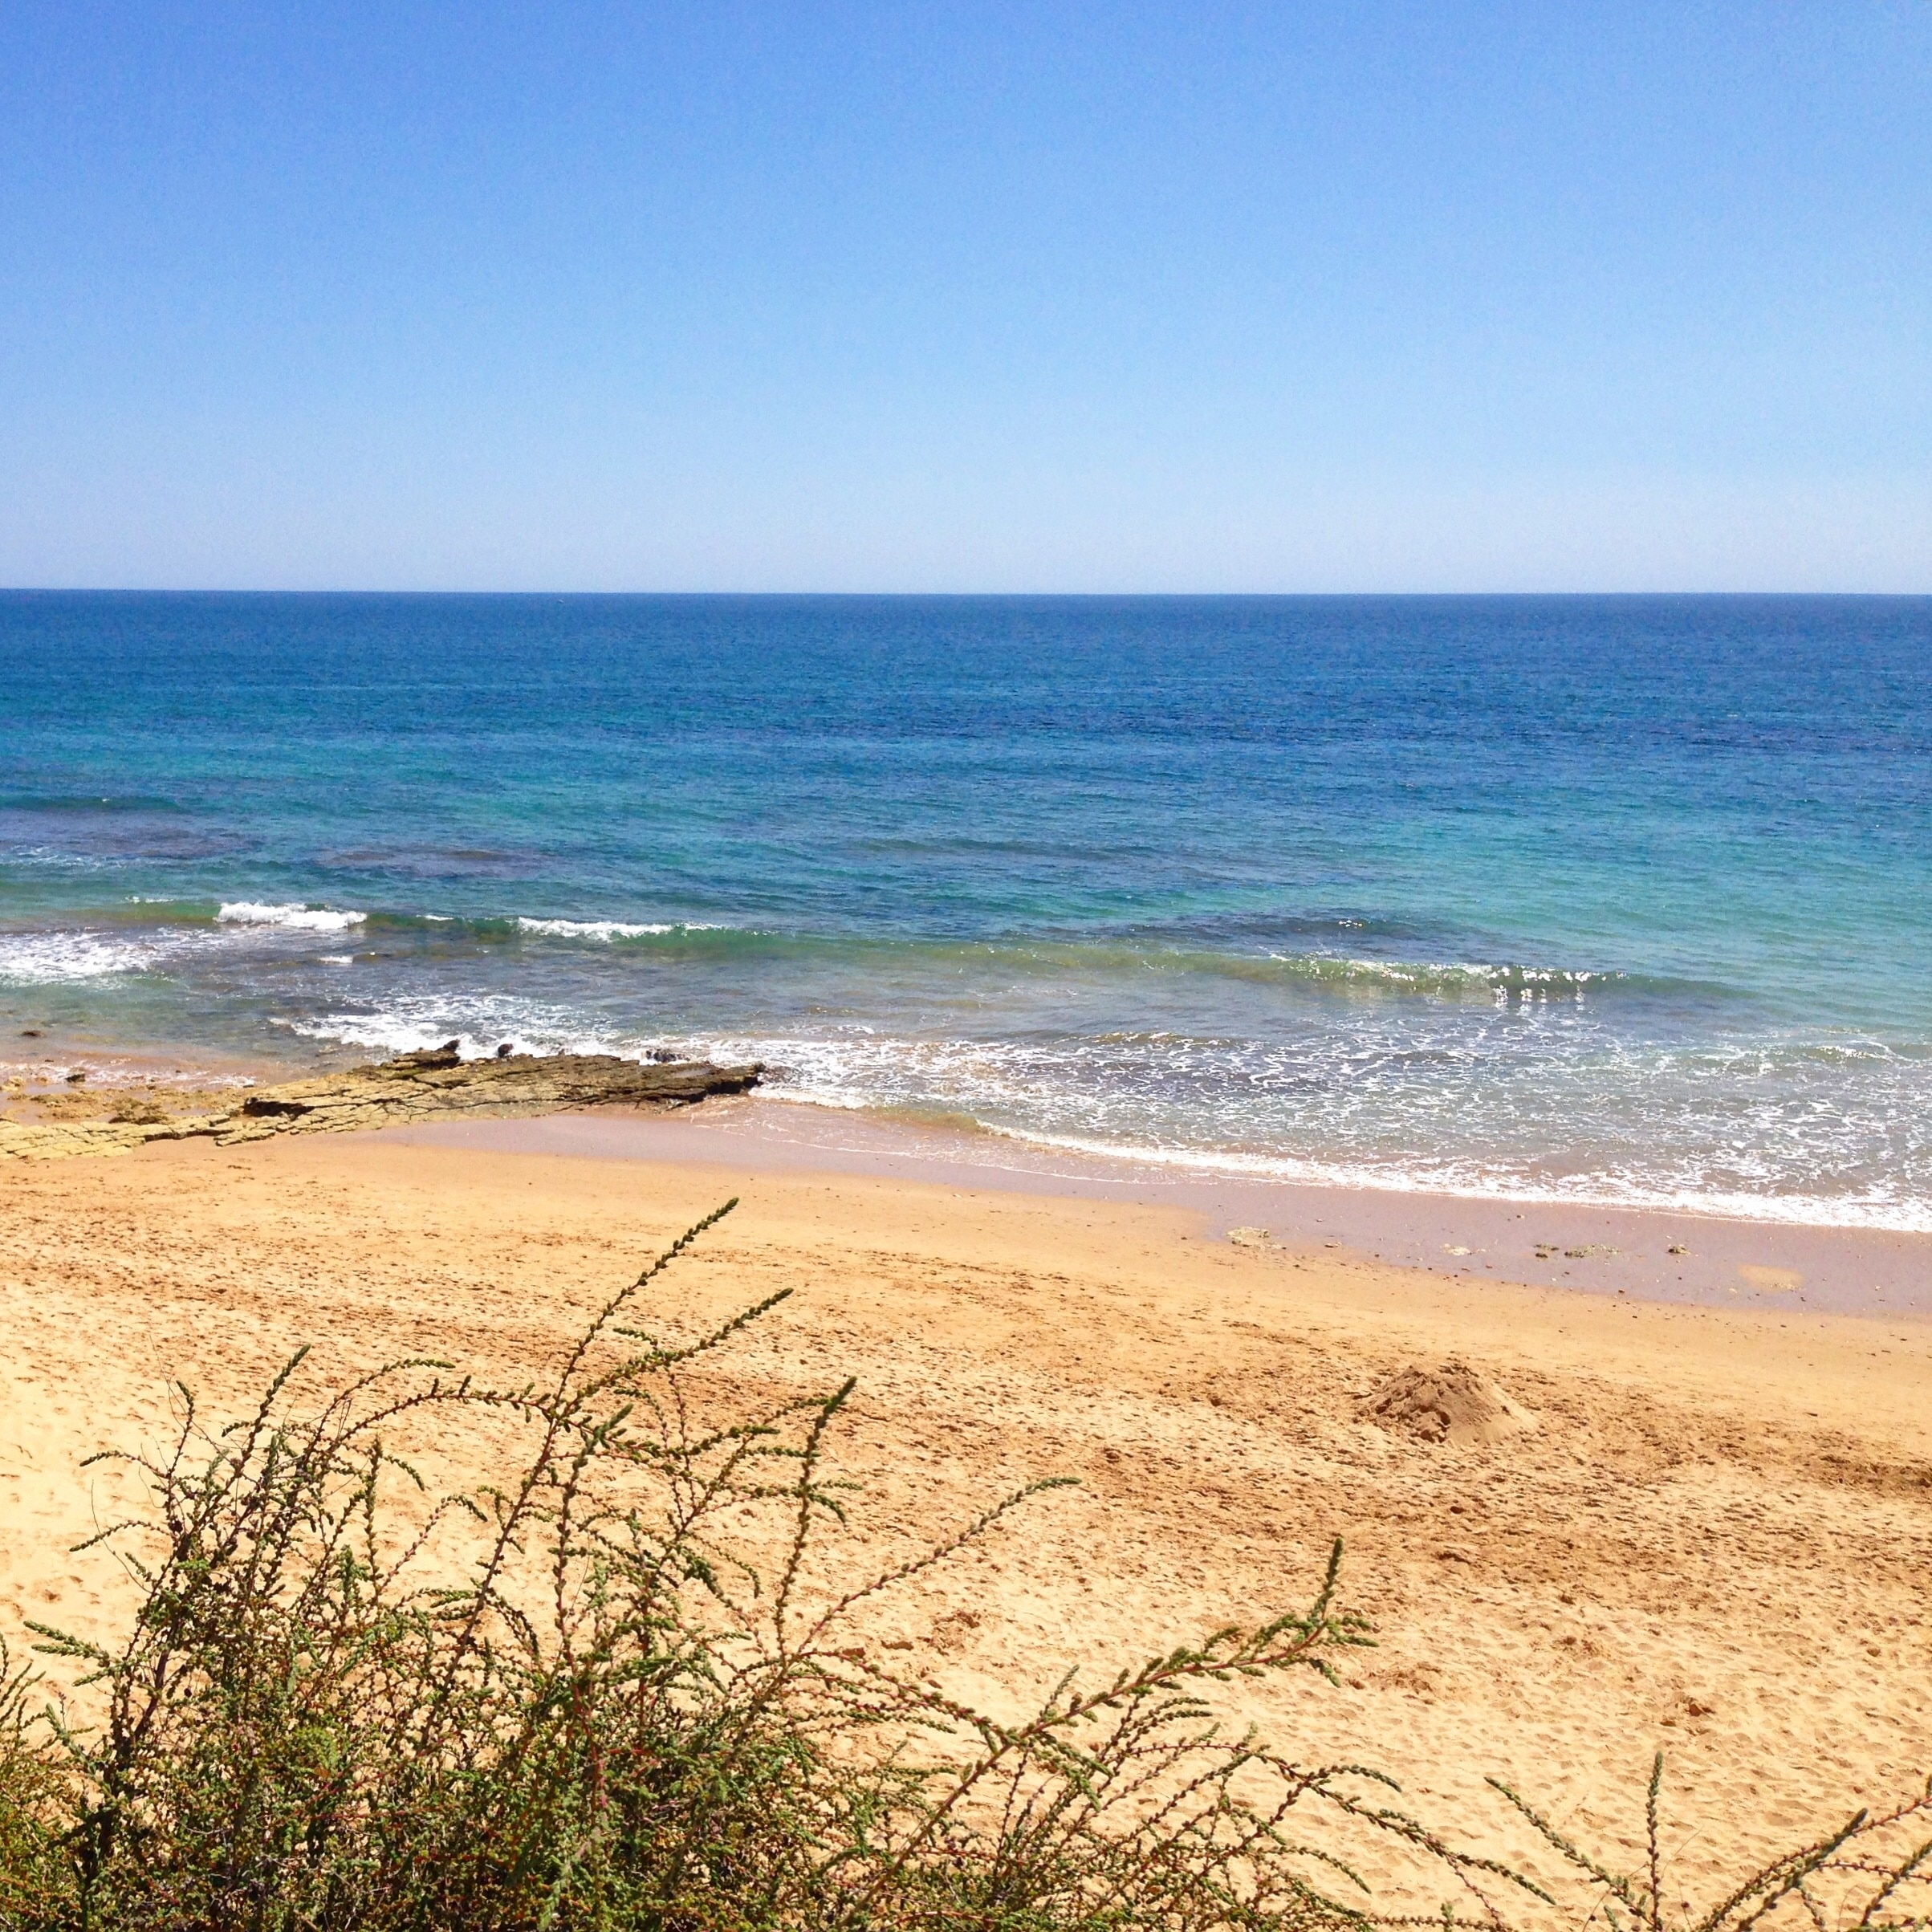 Is there anything better than clear blue skies, 27C (which in my opinion is the perfect temperature), the sea right in front of you...? I don't think so. 
#alifefullofserendipity #serendipitytess #travel #portugal #algarve #sea #sun #beach #sand #ocean #summer #perfection #nature #naturezza #natureperfection